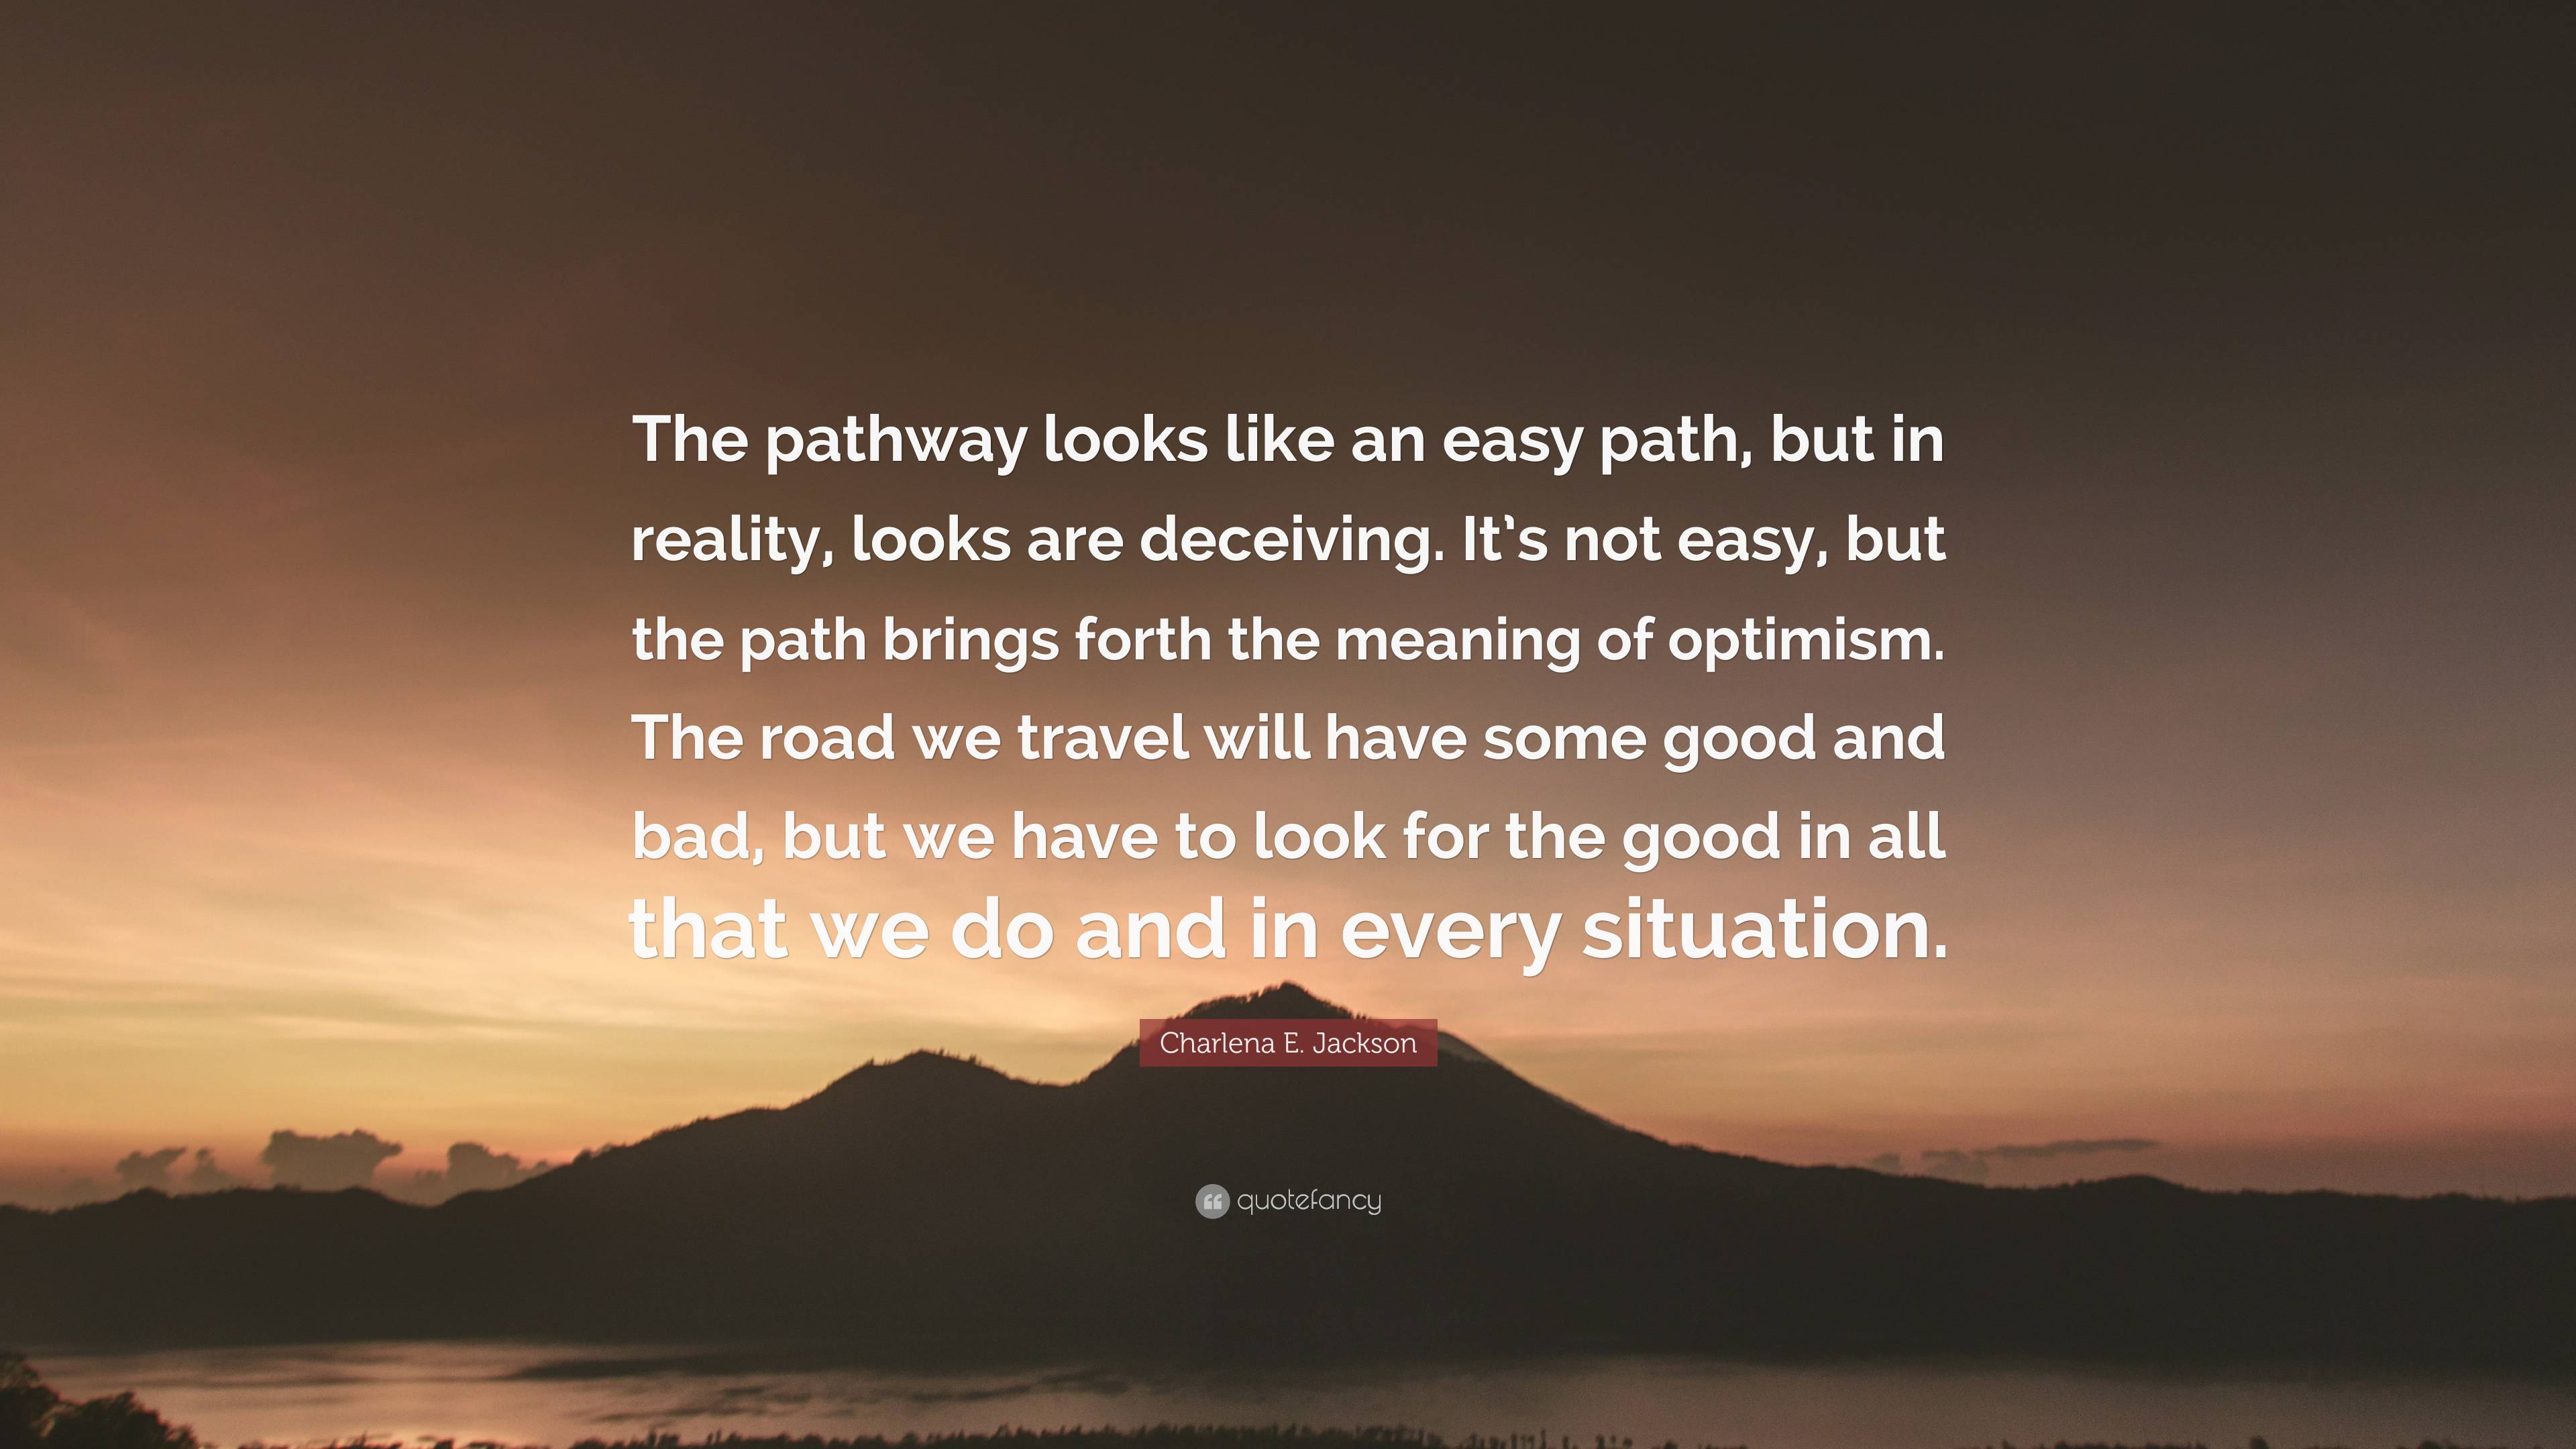 Charlena E. Jackson Quote: “The pathway looks like an easy path, but in  reality, looks are deceiving. It's not easy, but the path brings forth the  m”